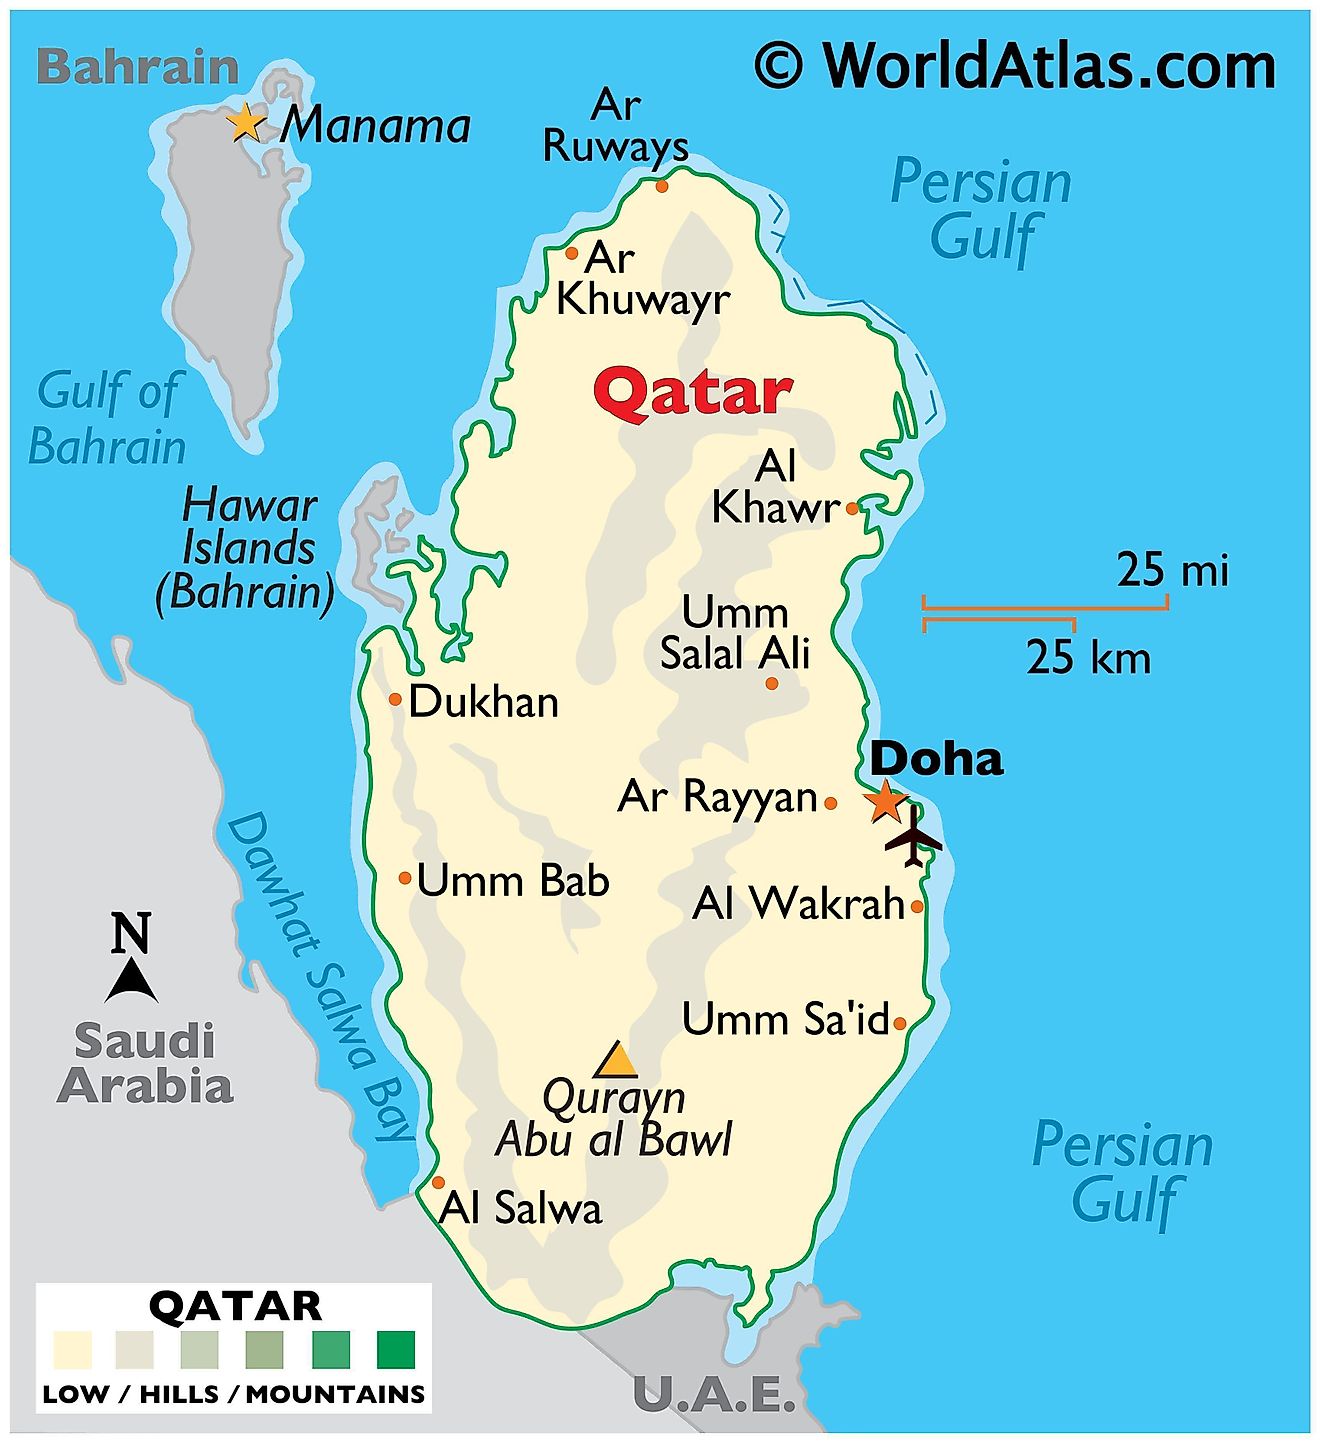 Physical Map of Qatar showing state boundaries, relief, important cities, and the highest point.